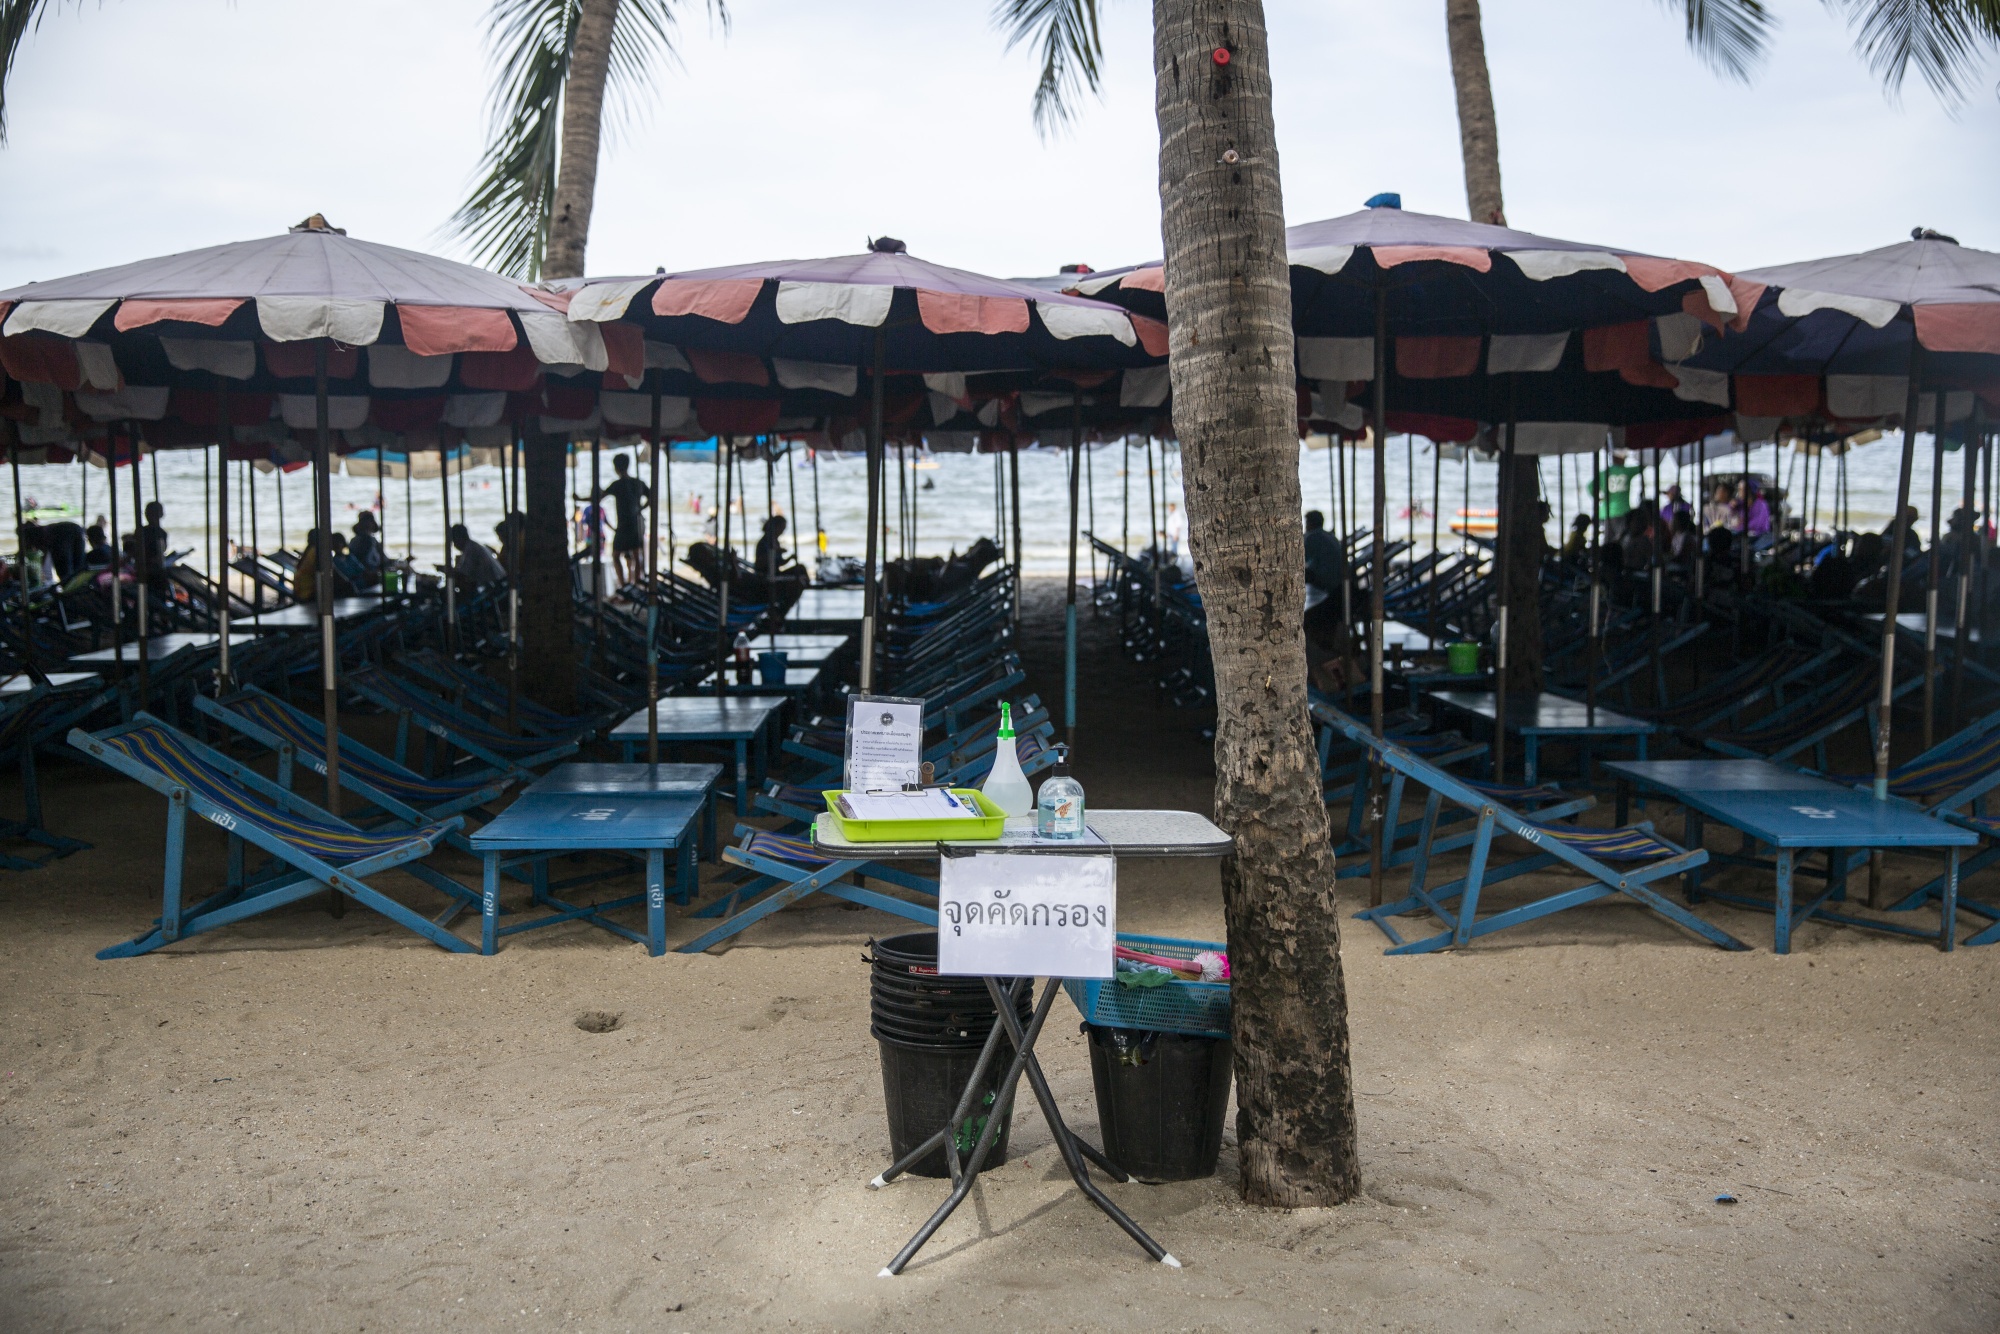 Hand sanitizer sits on a check-in table at Bangsaen Beach in Chonburi, Thailand, on June 14.